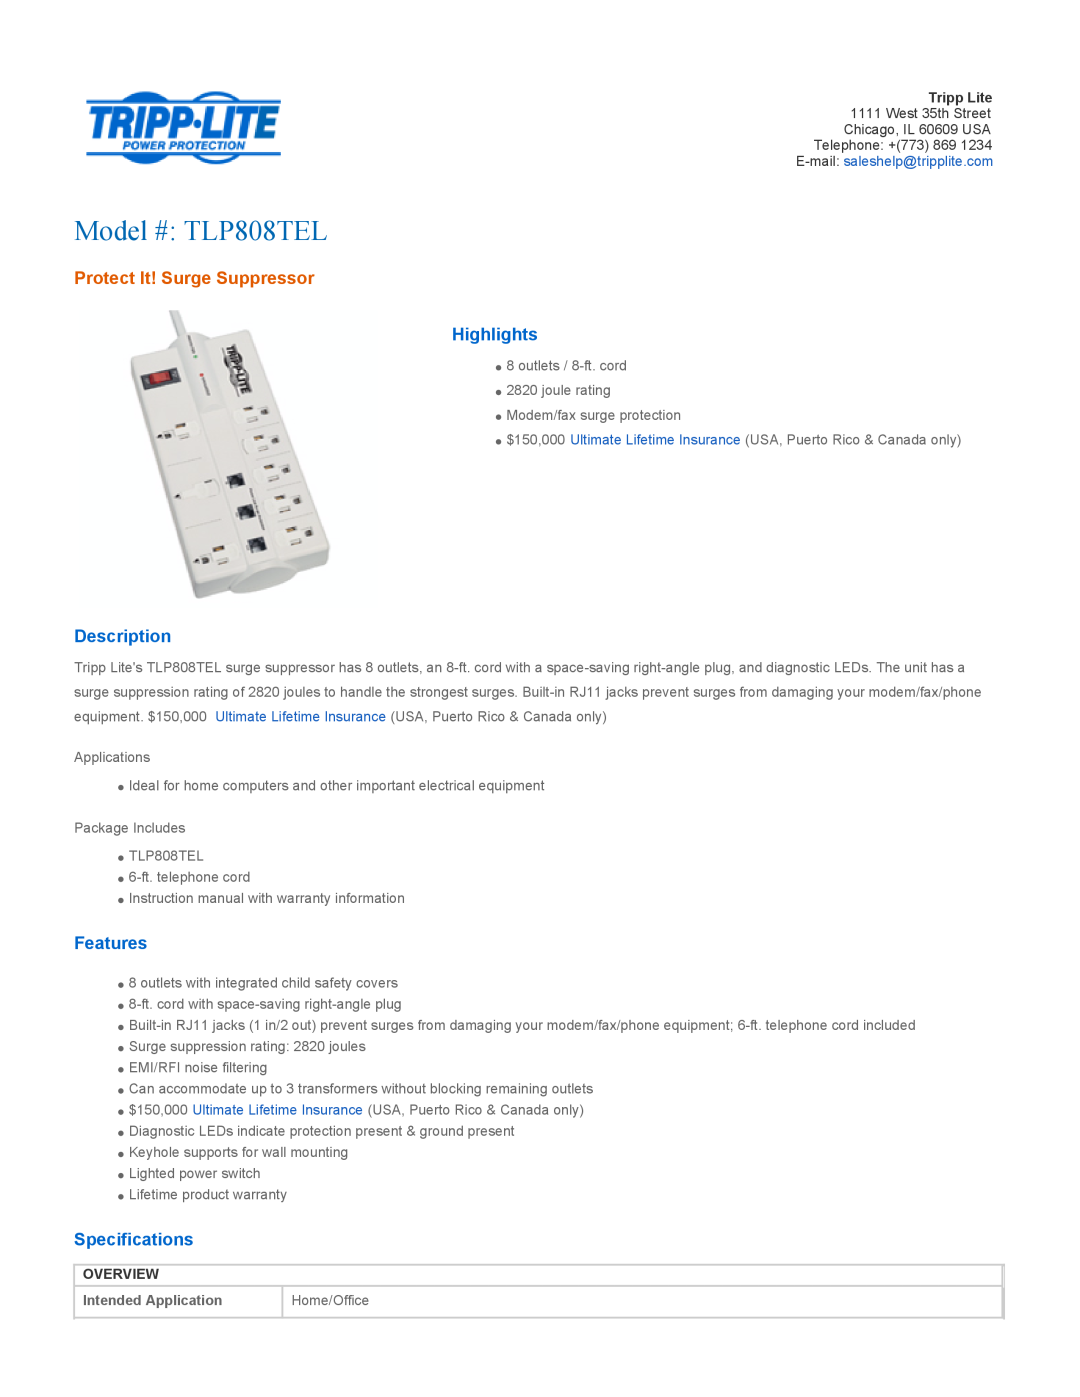 Tripp Lite specifications Overview, Model # TLP808TEL, Protect It! Surge Suppressor, Highlights, Description, Features 